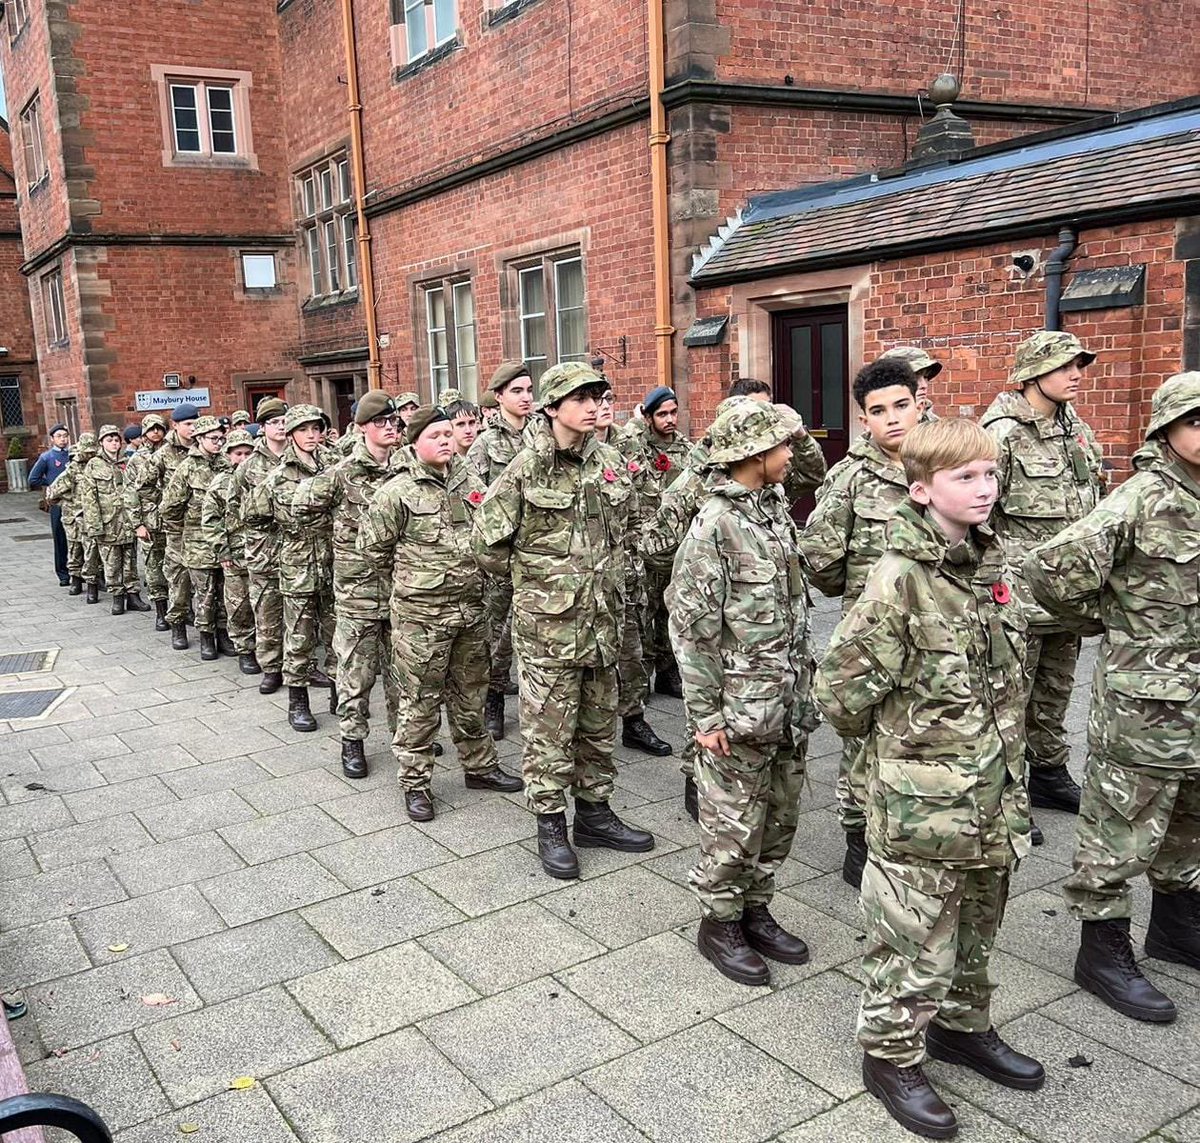 Today the Contingent took part in their annual Remembrance Parade. We were proud of how well they marched & took pride in the legacy of veterans from the school who have gone before them paying the ultimate sacrifice. @OSH_SCH @CCFcadets @aircadets @MercianRegiment @NationalACSMI